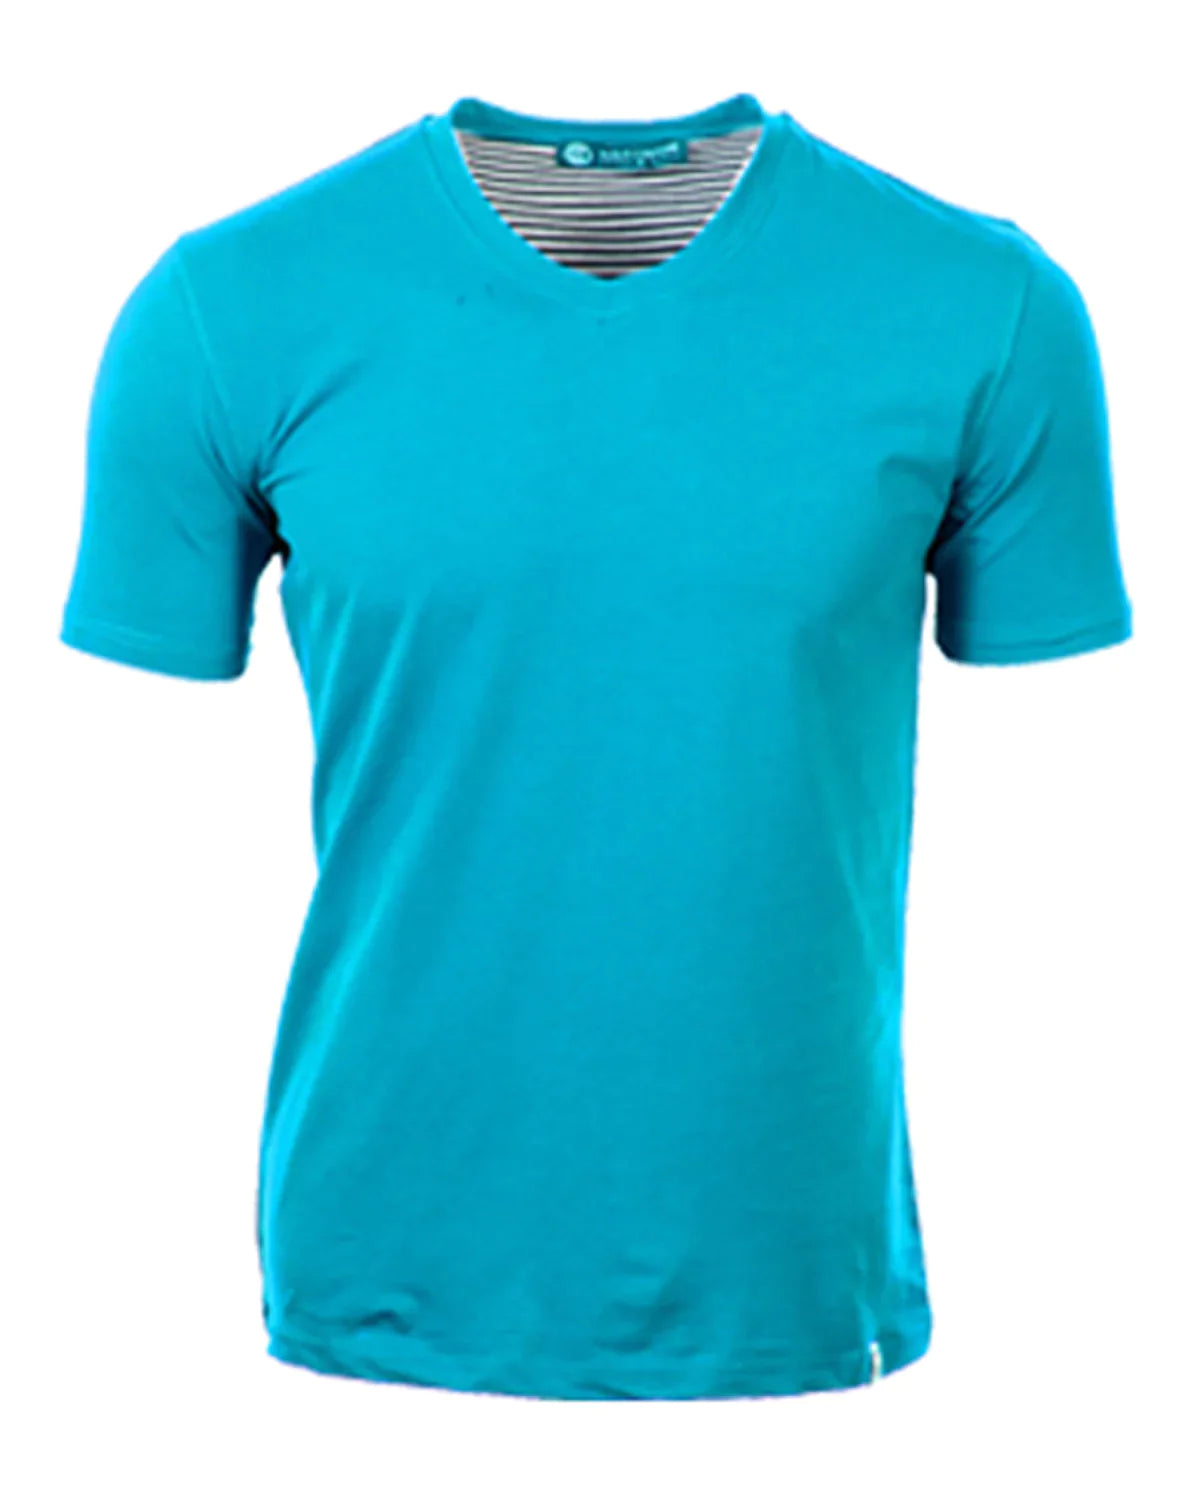 SUSLO V-NECK TEE - 4 COLORS TO CHOOSE - DealByEthan.gay